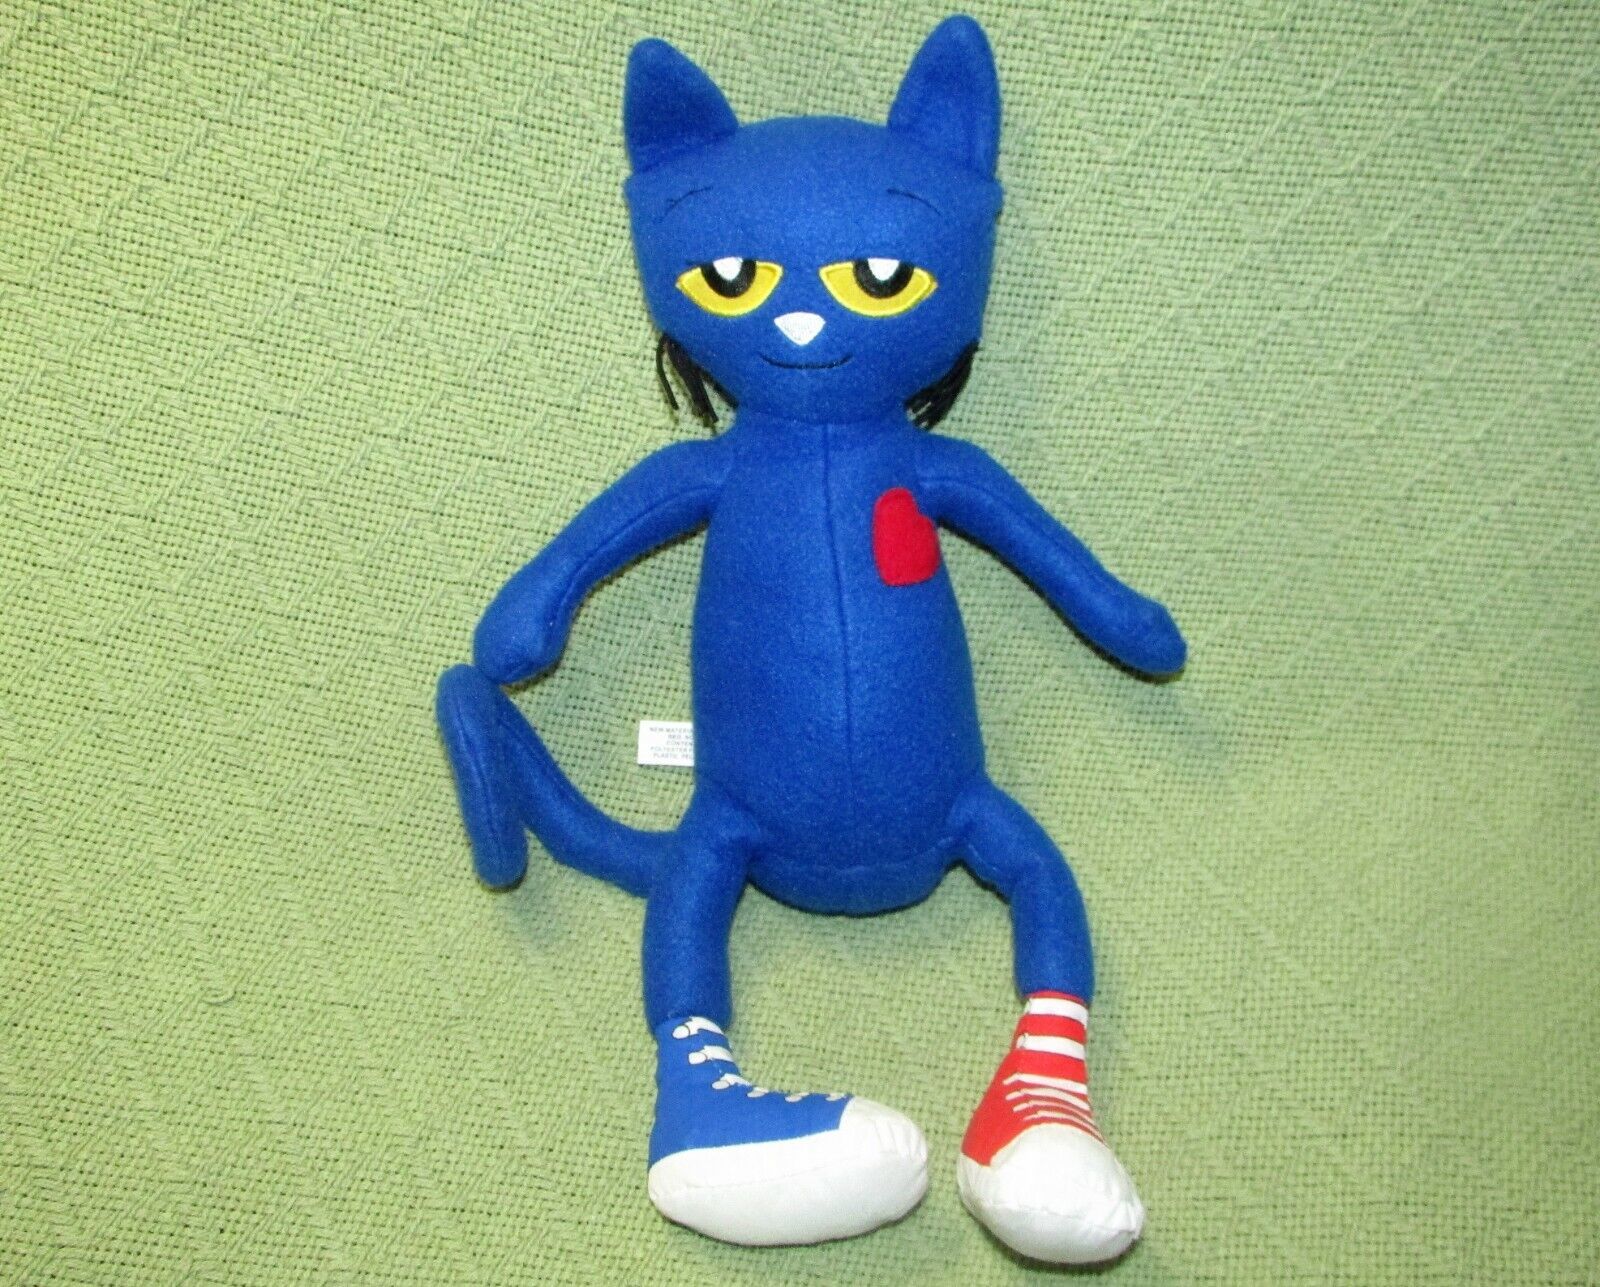 13" PETE THE CAT PLUSH MERRYMAKERS DOLL 2010 BLUE WITH RED HEART STUFFED ANIMAL - £17.77 GBP